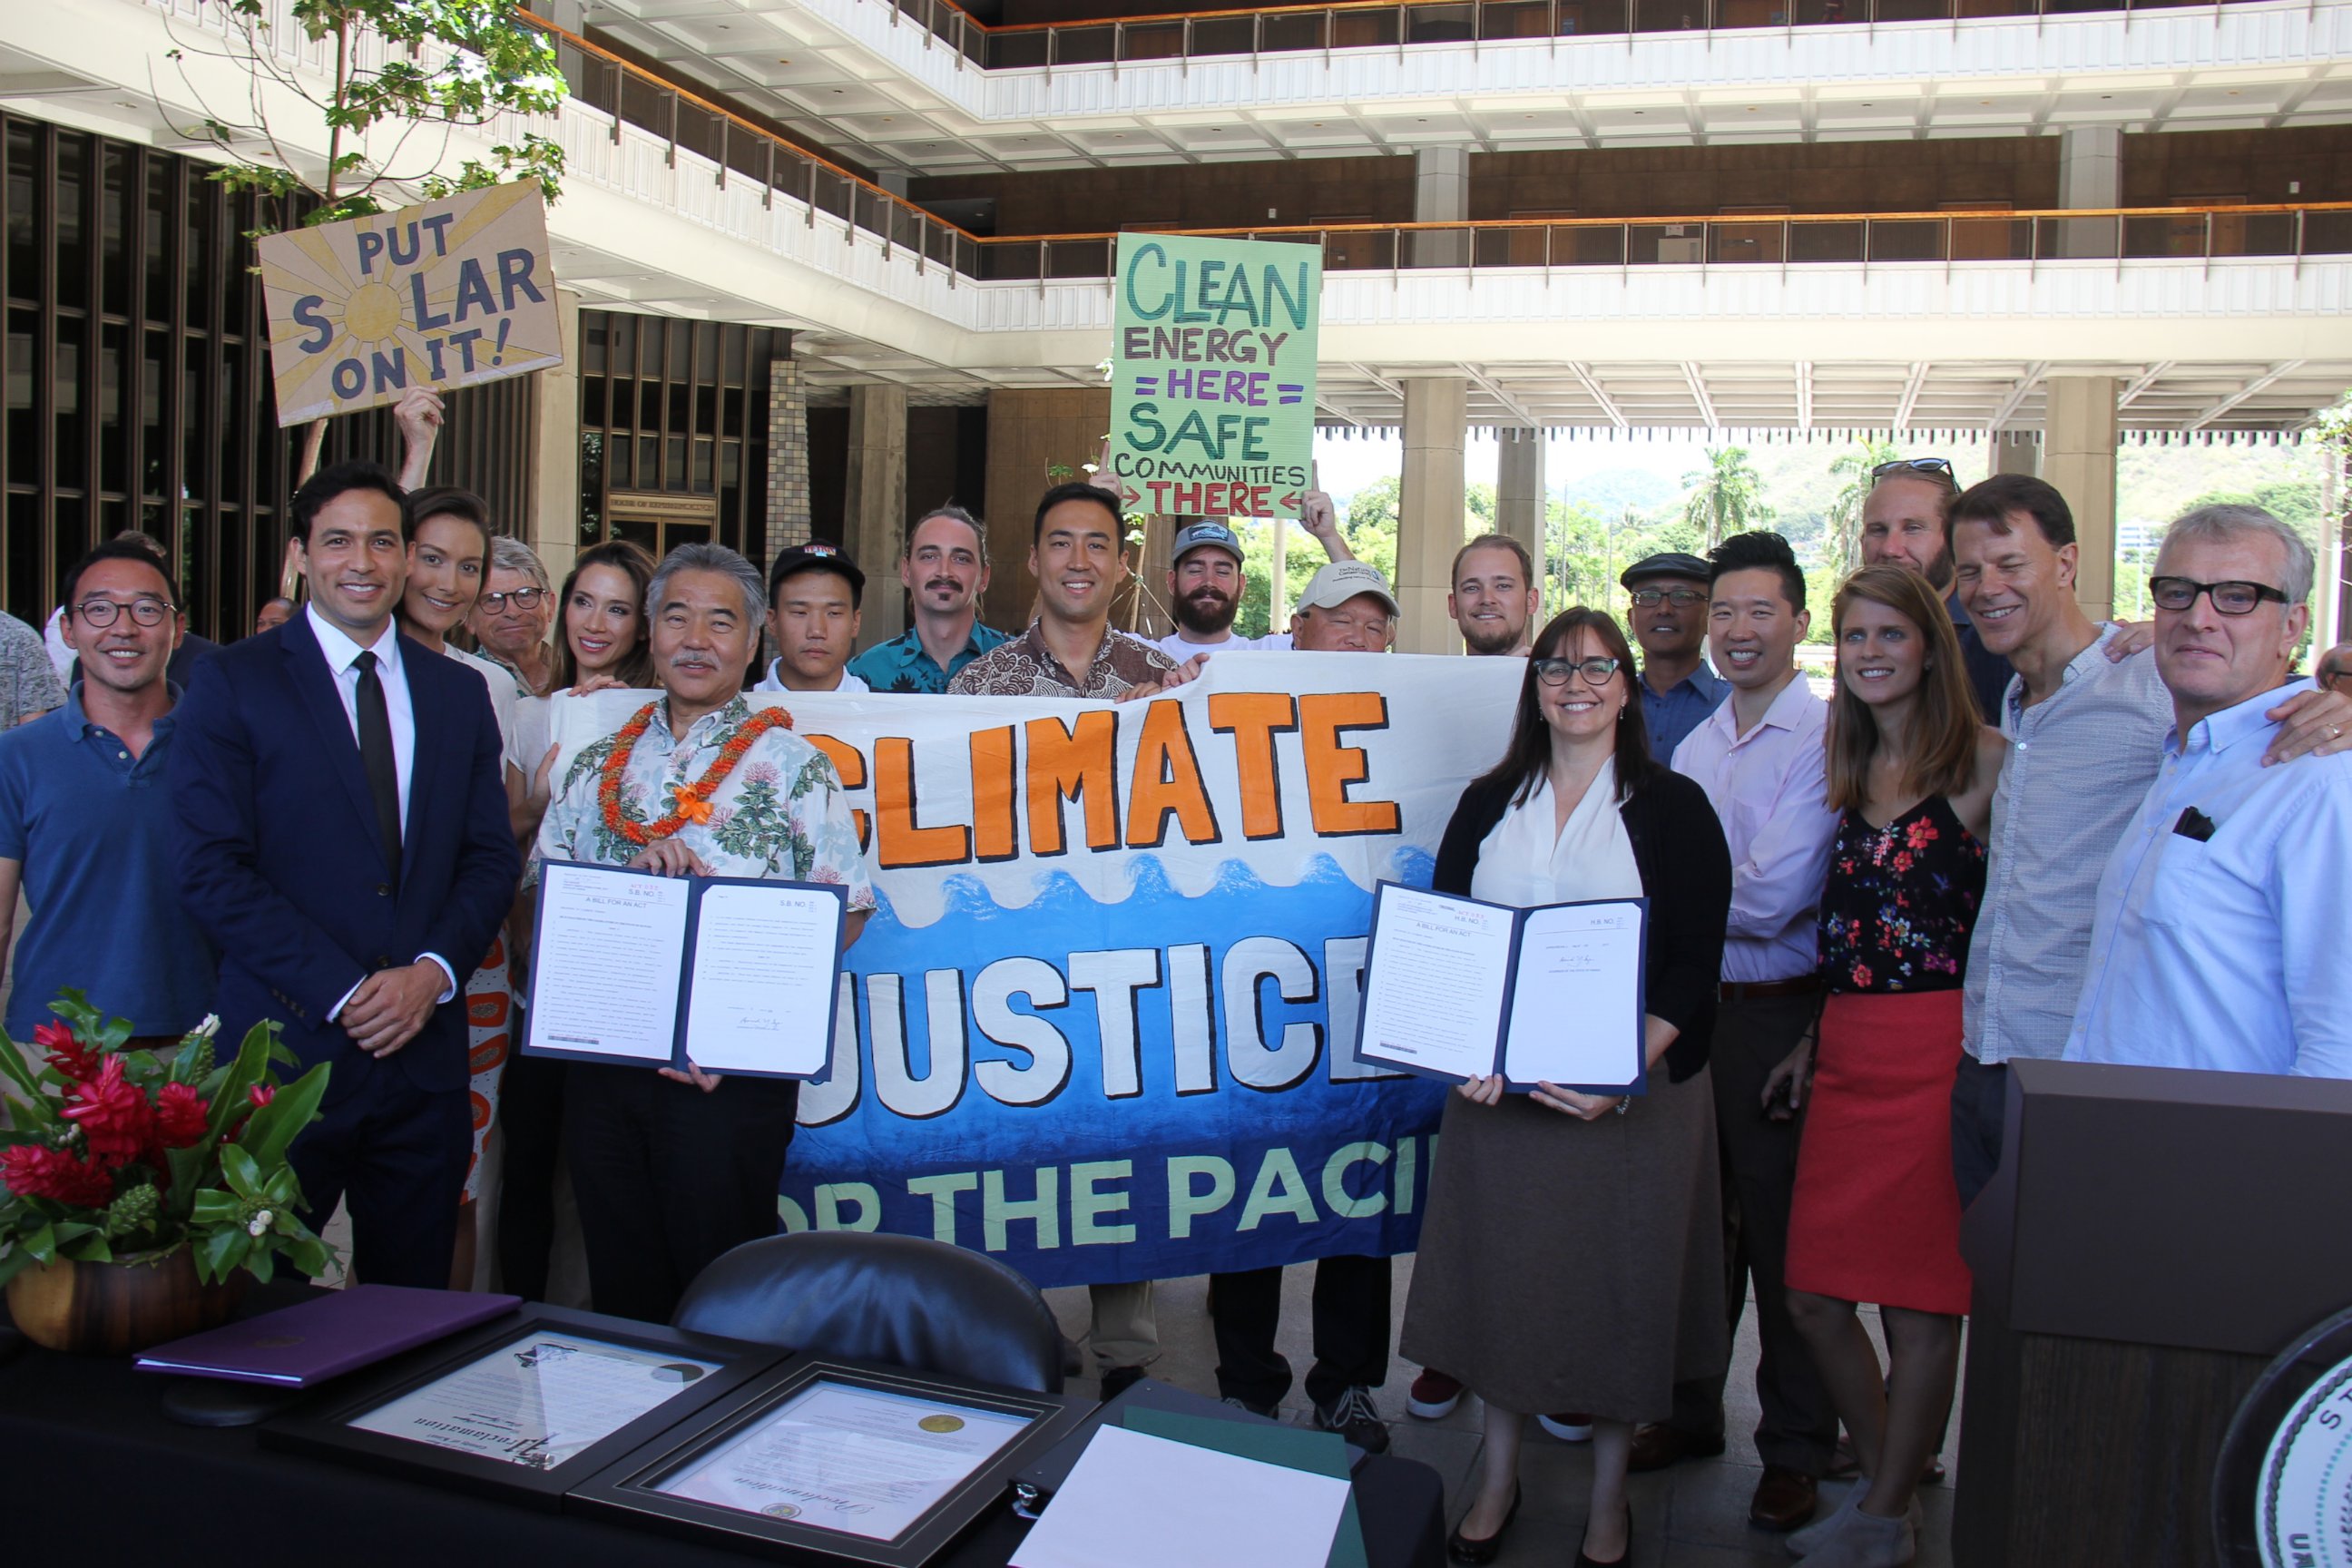 PHOTO: Hawaii became the first state Tuesday to enact a law that aligns with the Paris agreement.